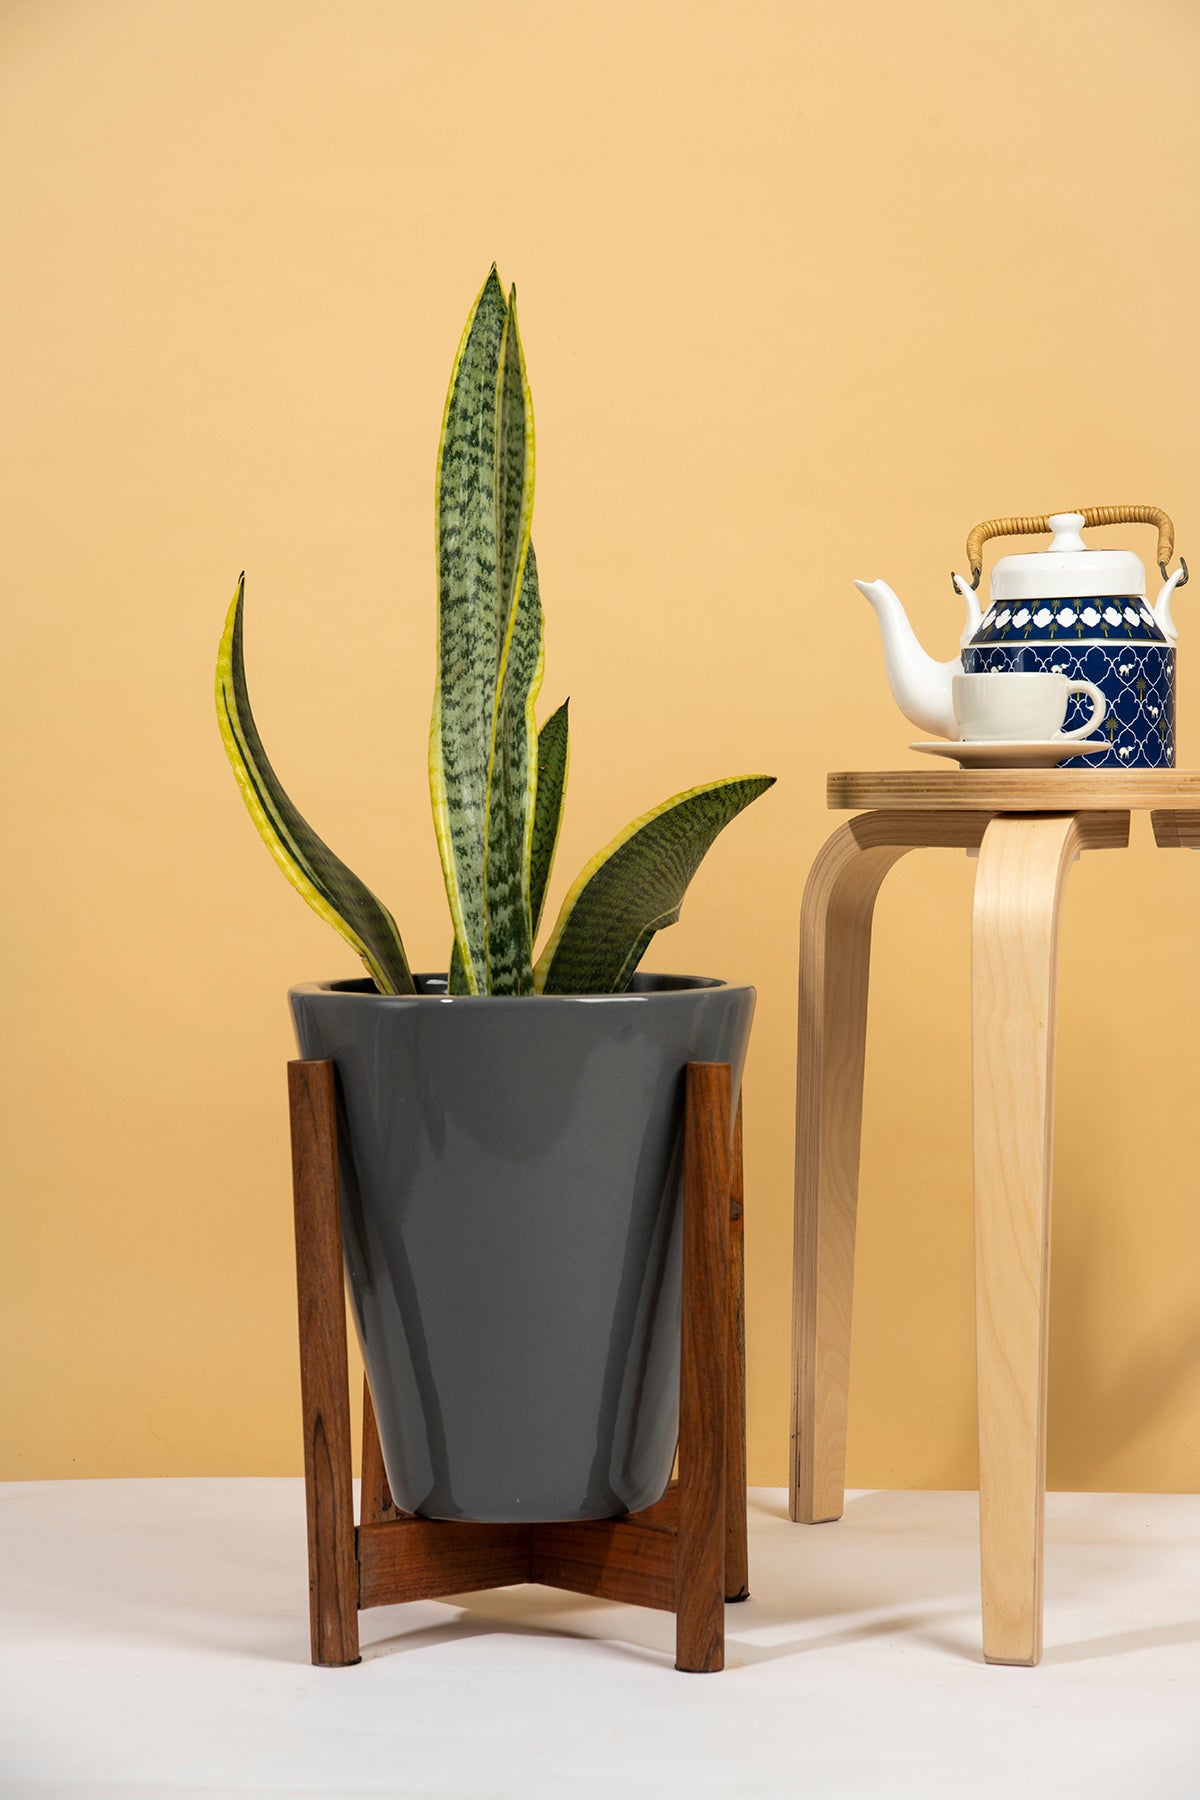 Medium Size Love Bite ceramic planter with wooden stand in Grey color with snake plant in it.